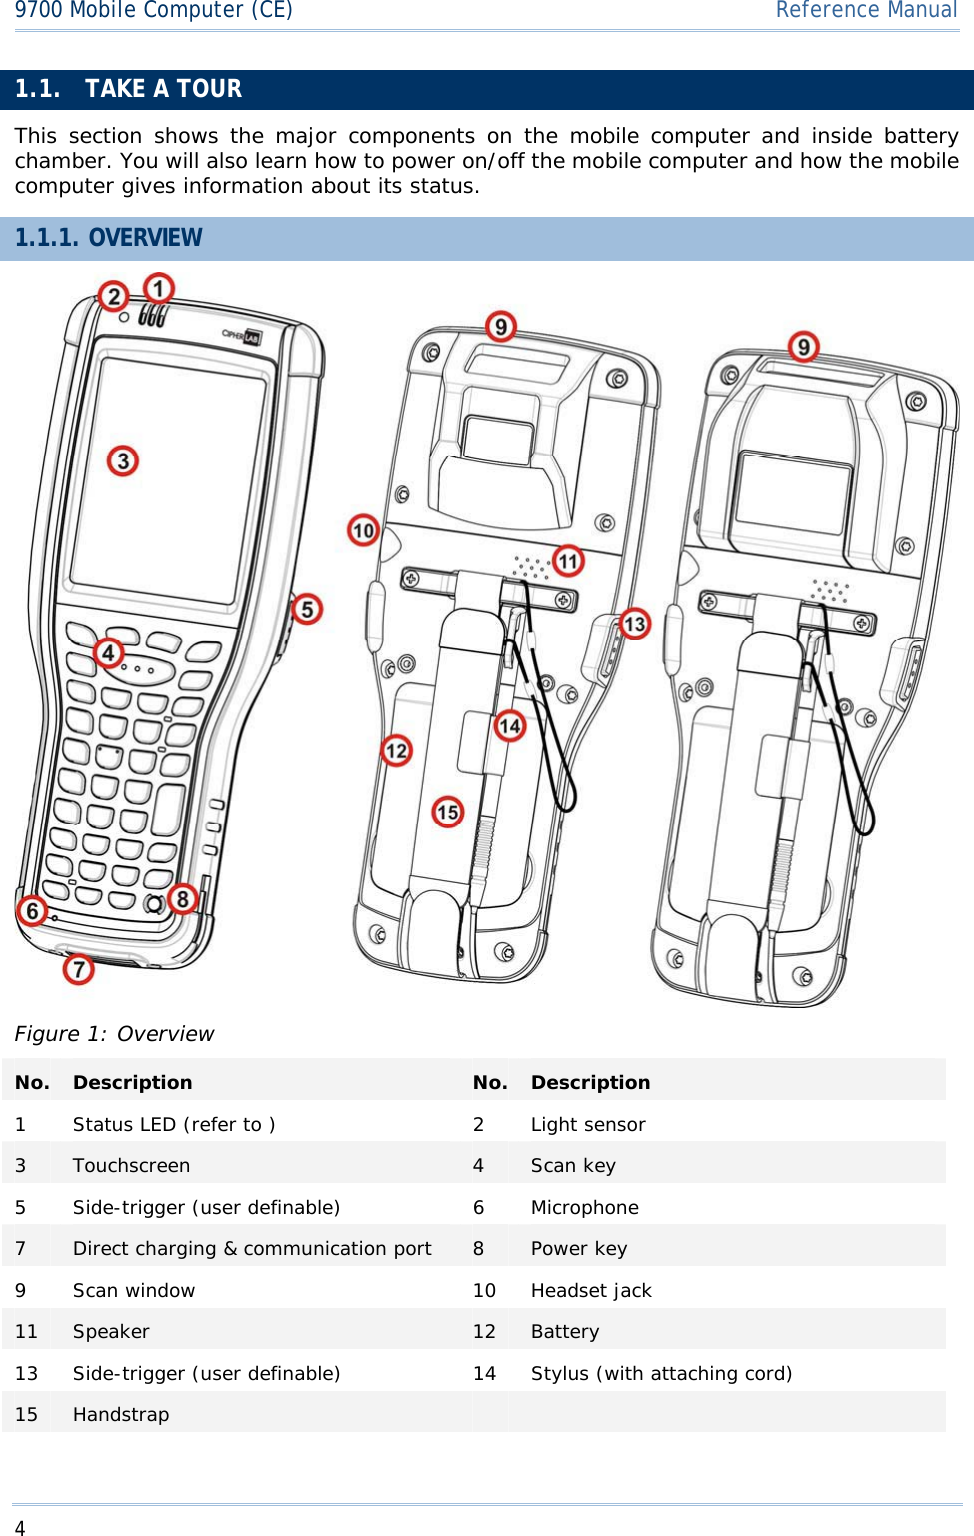 49700 Mobile Computer (CE)  Reference Manual1.1. TAKE A TOUR This section shows the major components on the mobile computer and inside battery chamber. You will also learn how to power on/off the mobile computer and how the mobile computer gives information about its status. 1.1.1. OVERVIEW Figure 1: Overview No. Description  No. Description 1  Status LED (refer to )  2  Light sensor 3Touchscreen  4Scan key 5  Side-trigger (user definable)  6  Microphone 7Direct charging &amp; communication port  8Power key 9  Scan window  10  Headset jack 11 Speaker  12 Battery13  Side-trigger (user definable)  14  Stylus (with attaching cord) 15 Handstrap